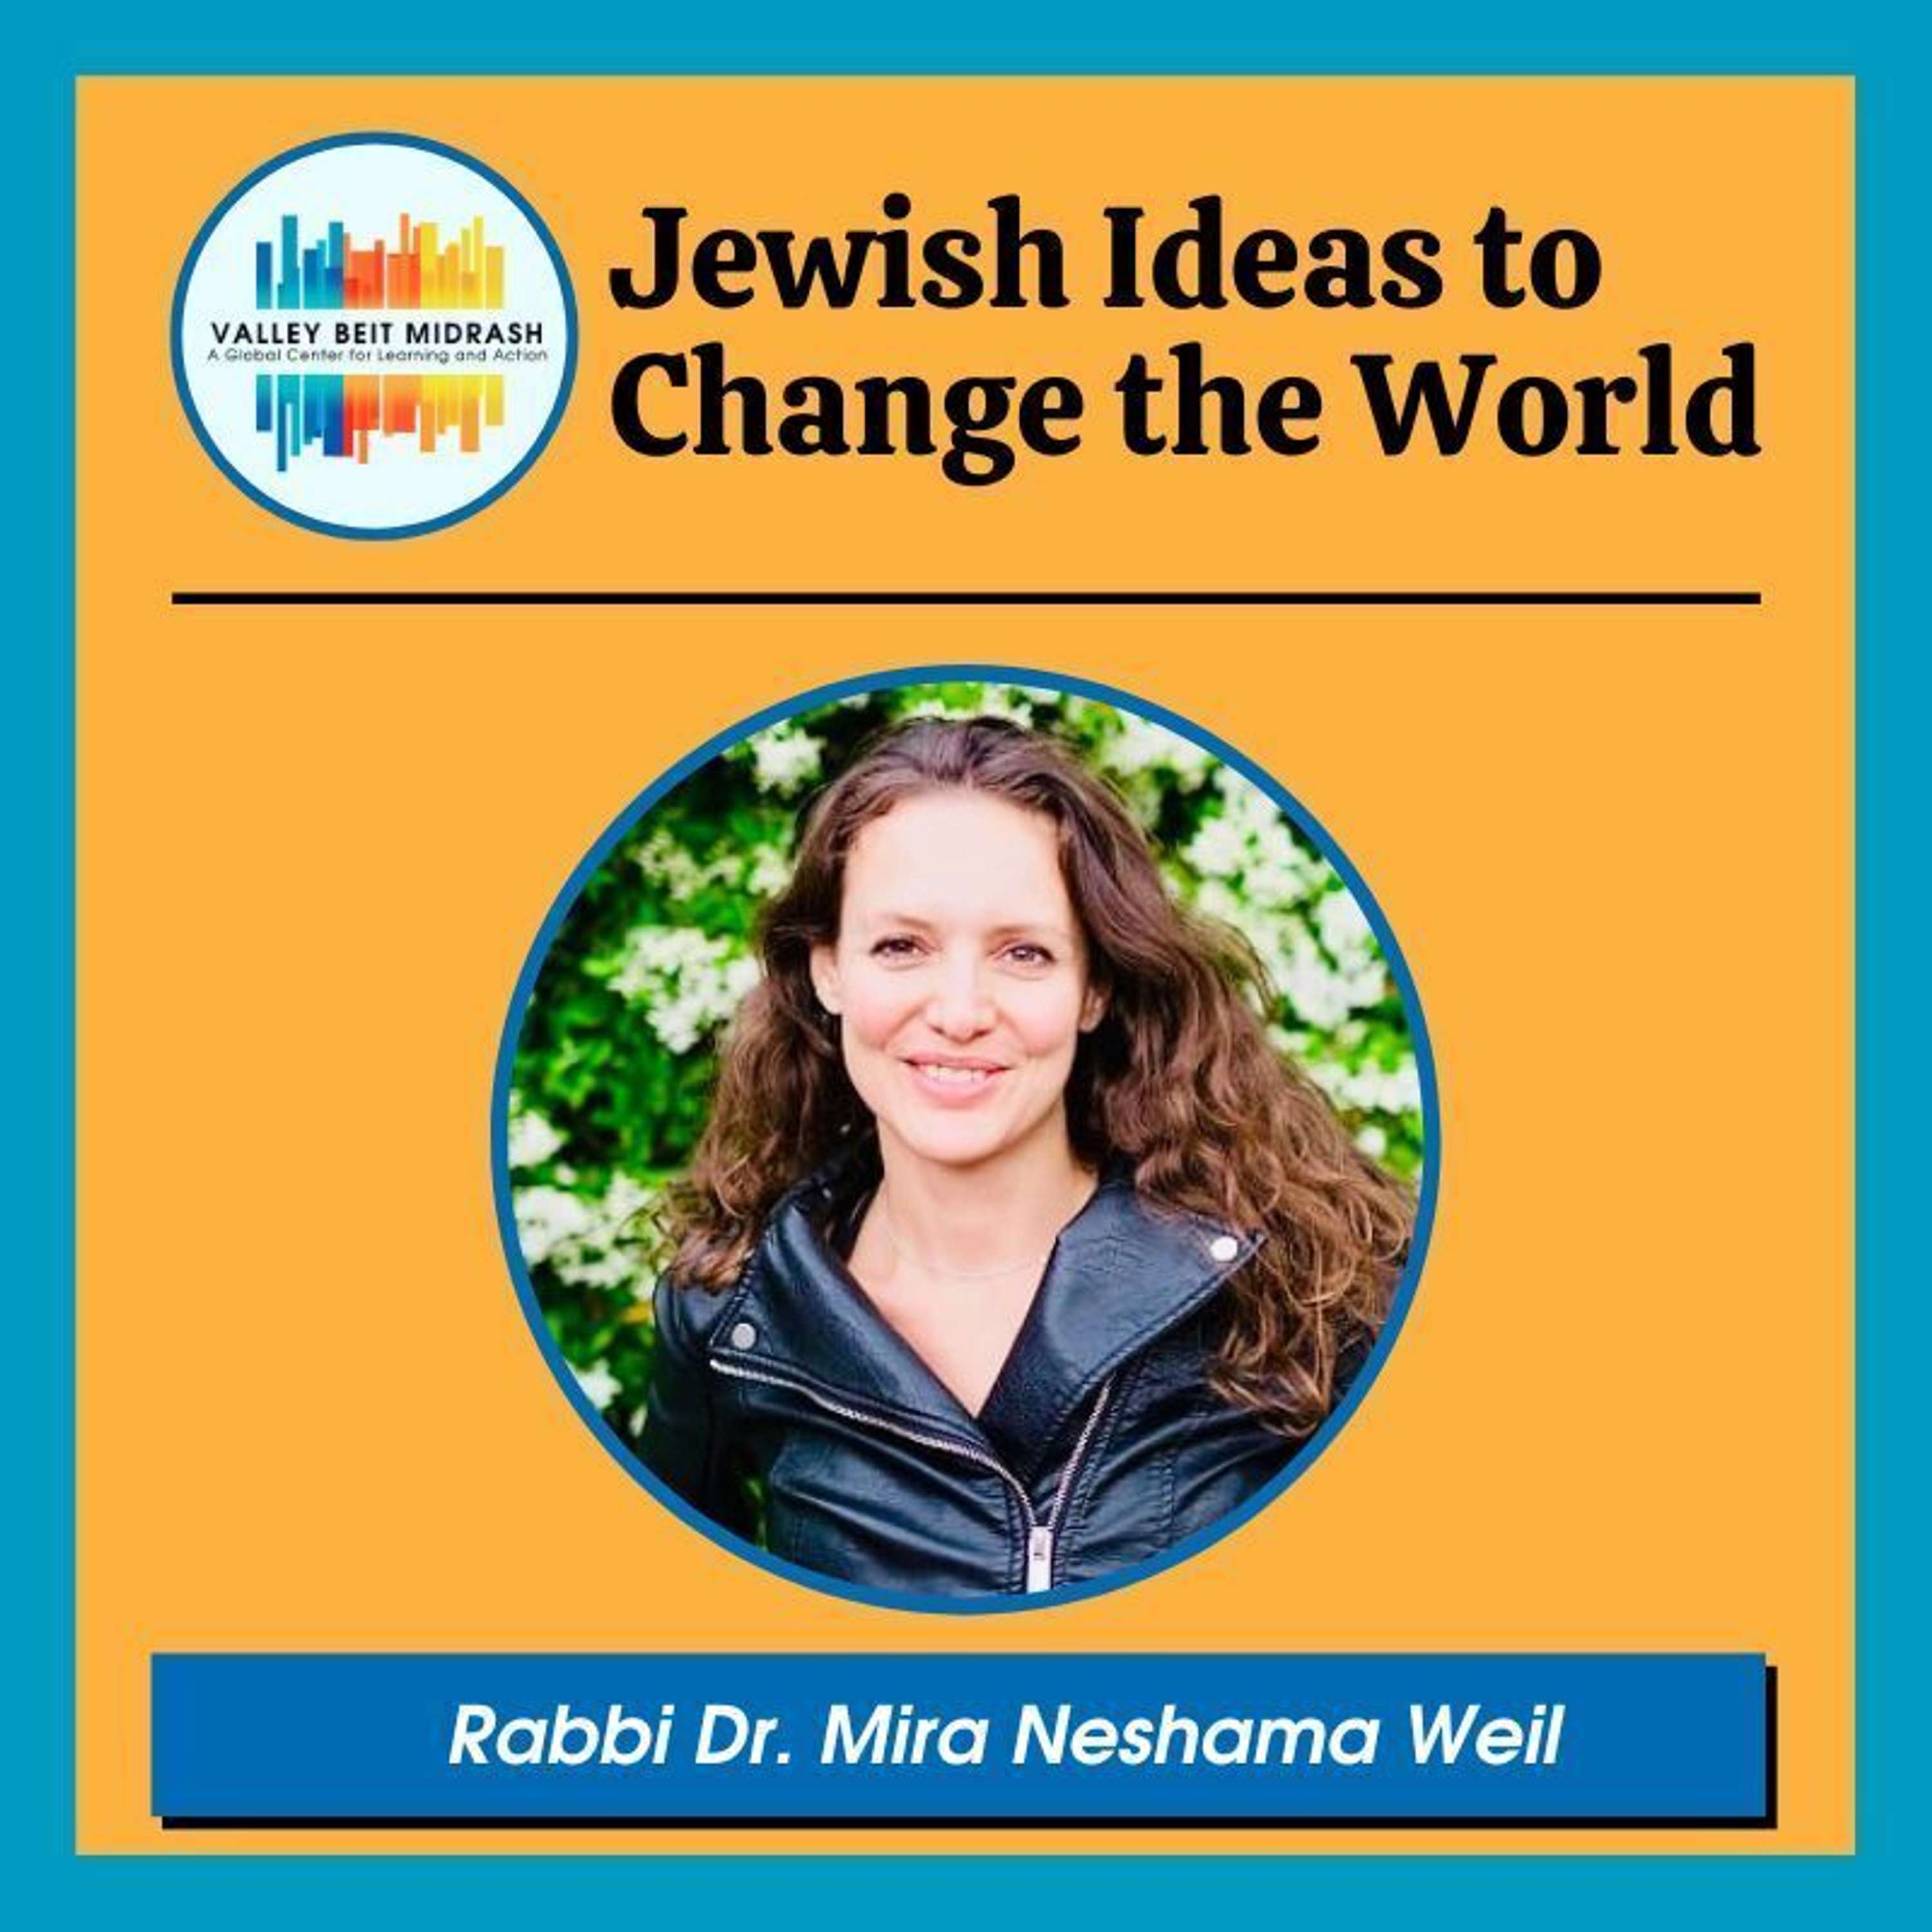 What If: Faith for Non Believers and Other Ways of Rethinking Emunah